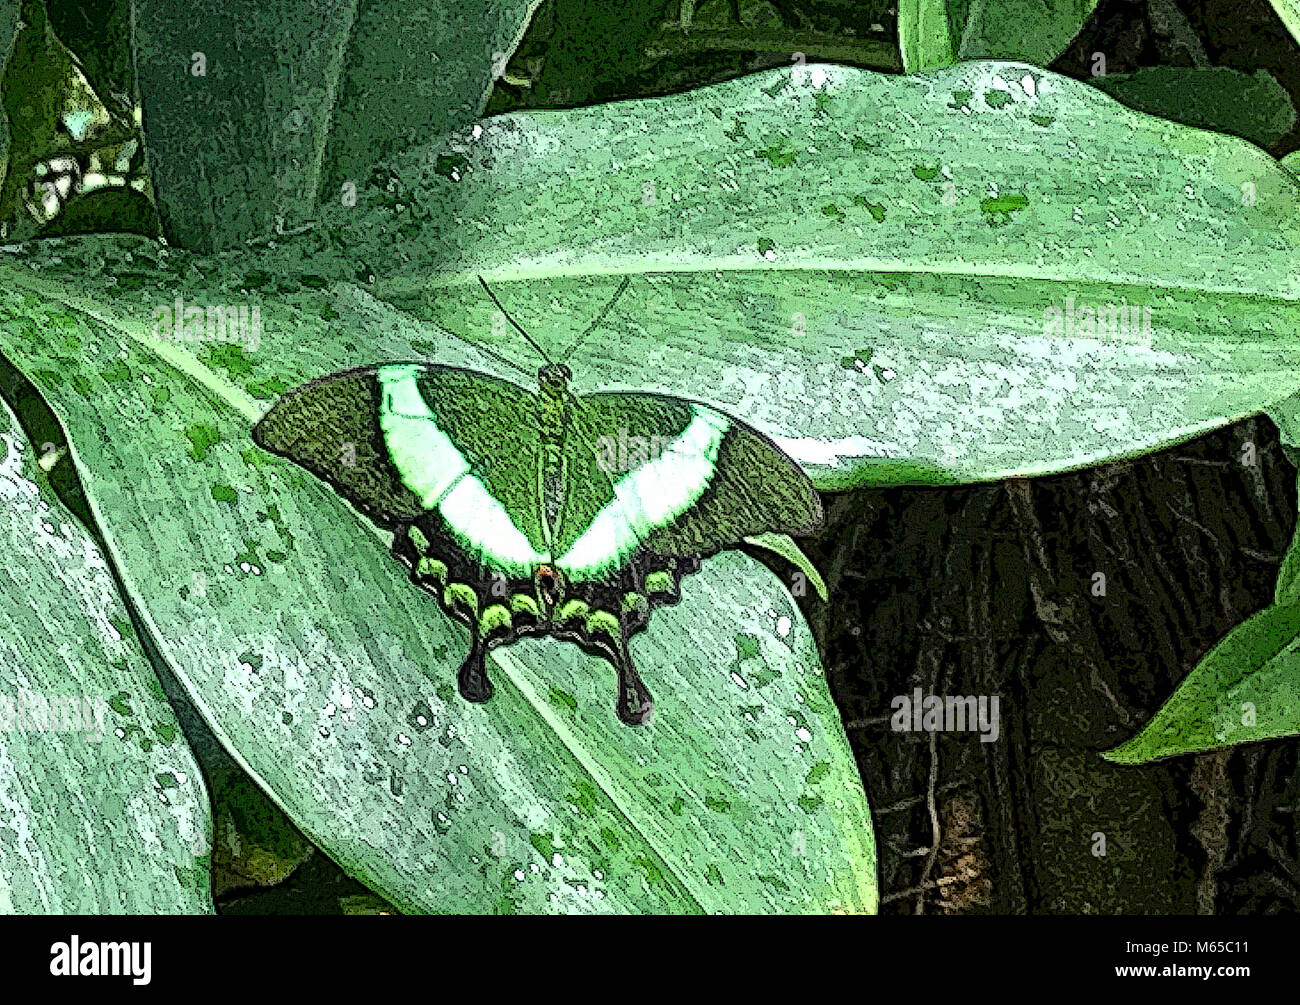 This butterfly is a camouflage on a leaf Stock Photo - Alamy